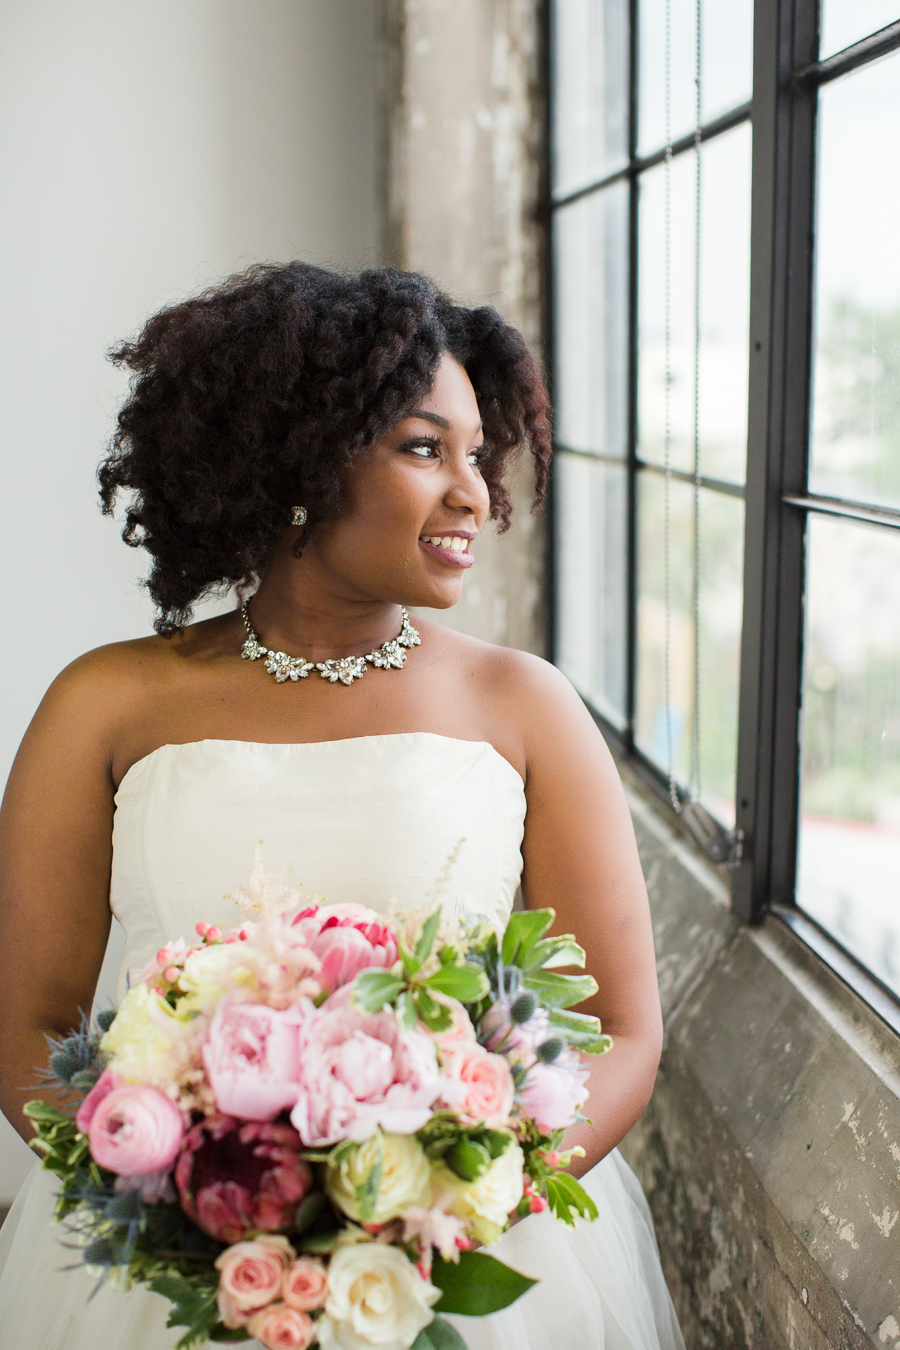 Gorgeous African American bride, wedding hairstyle and a colorful floral bouquet